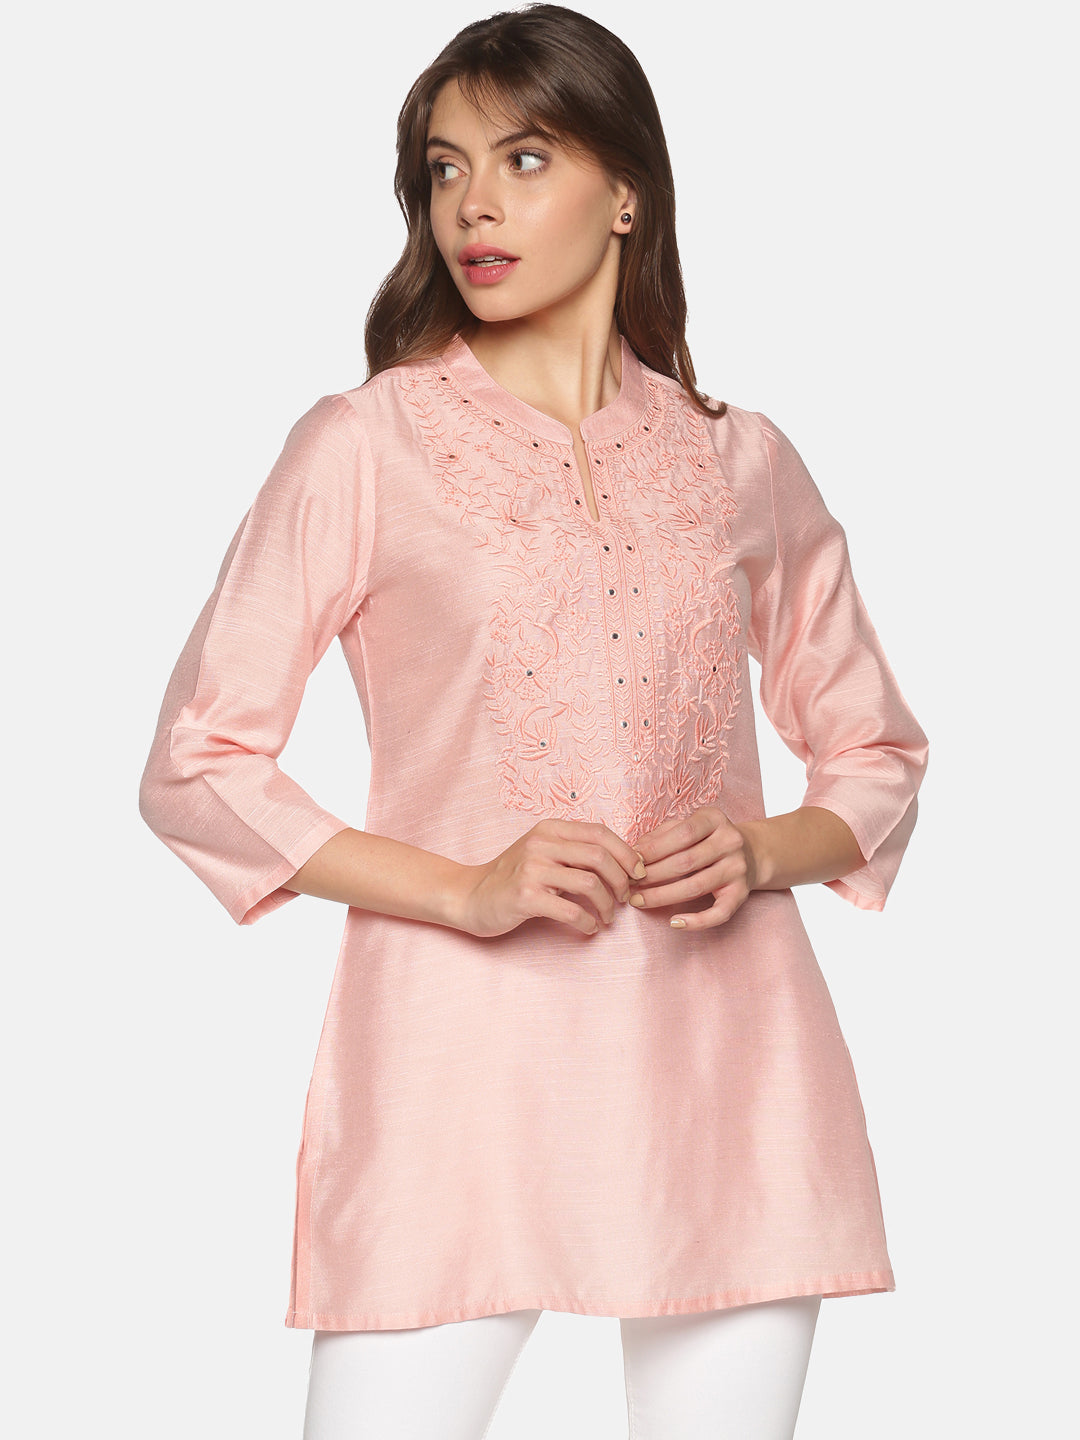 Pink Art Raw Silk Tunic with Floral Embroidered Neck & Mirror Accents